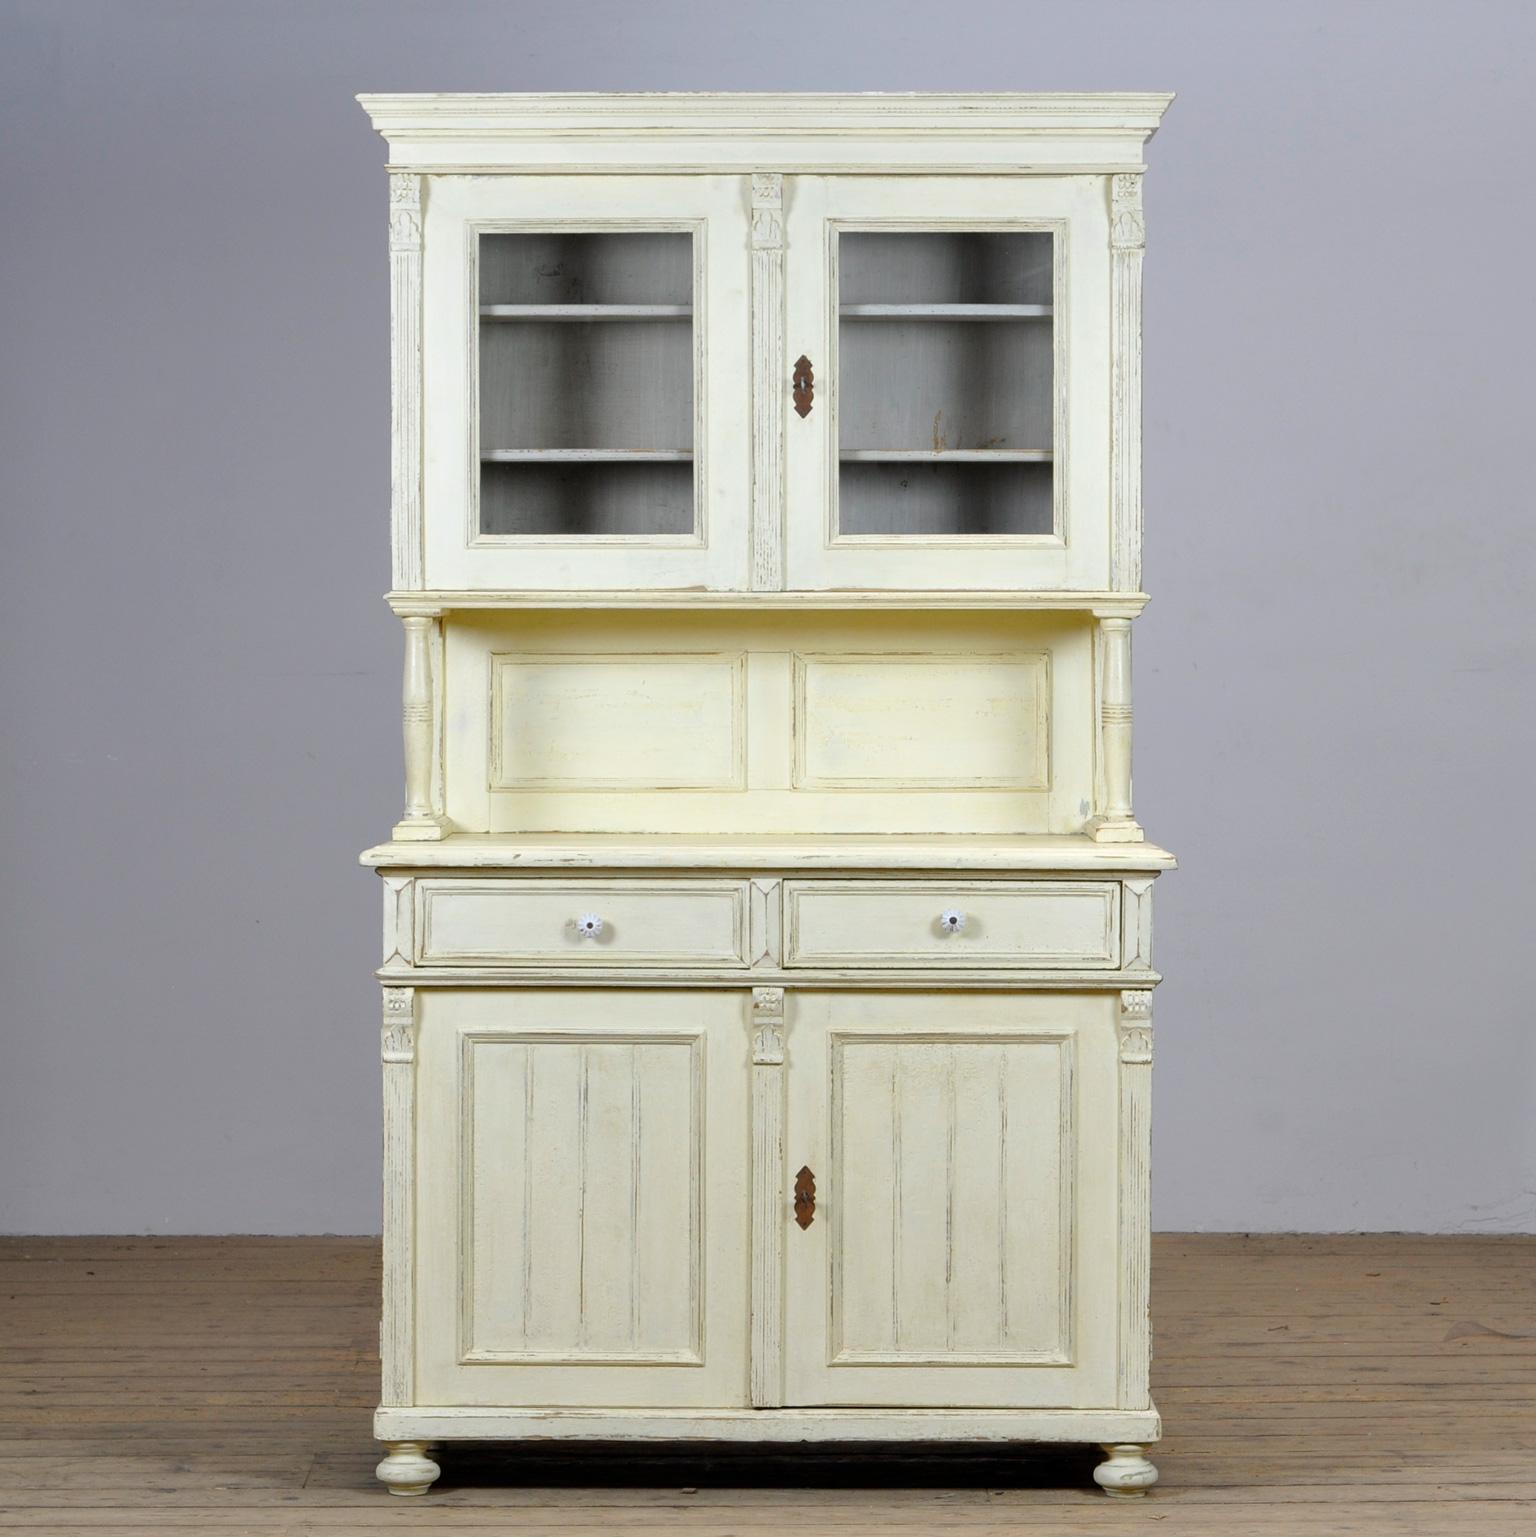 Large pine cupboard from the 1920s. The cabinet consists of 2 separate parts. In the upper part 2 doors with two shelves. At the bottom 2 drawers above and 2 doors with a shelf for plenty of storage space. Original paint.